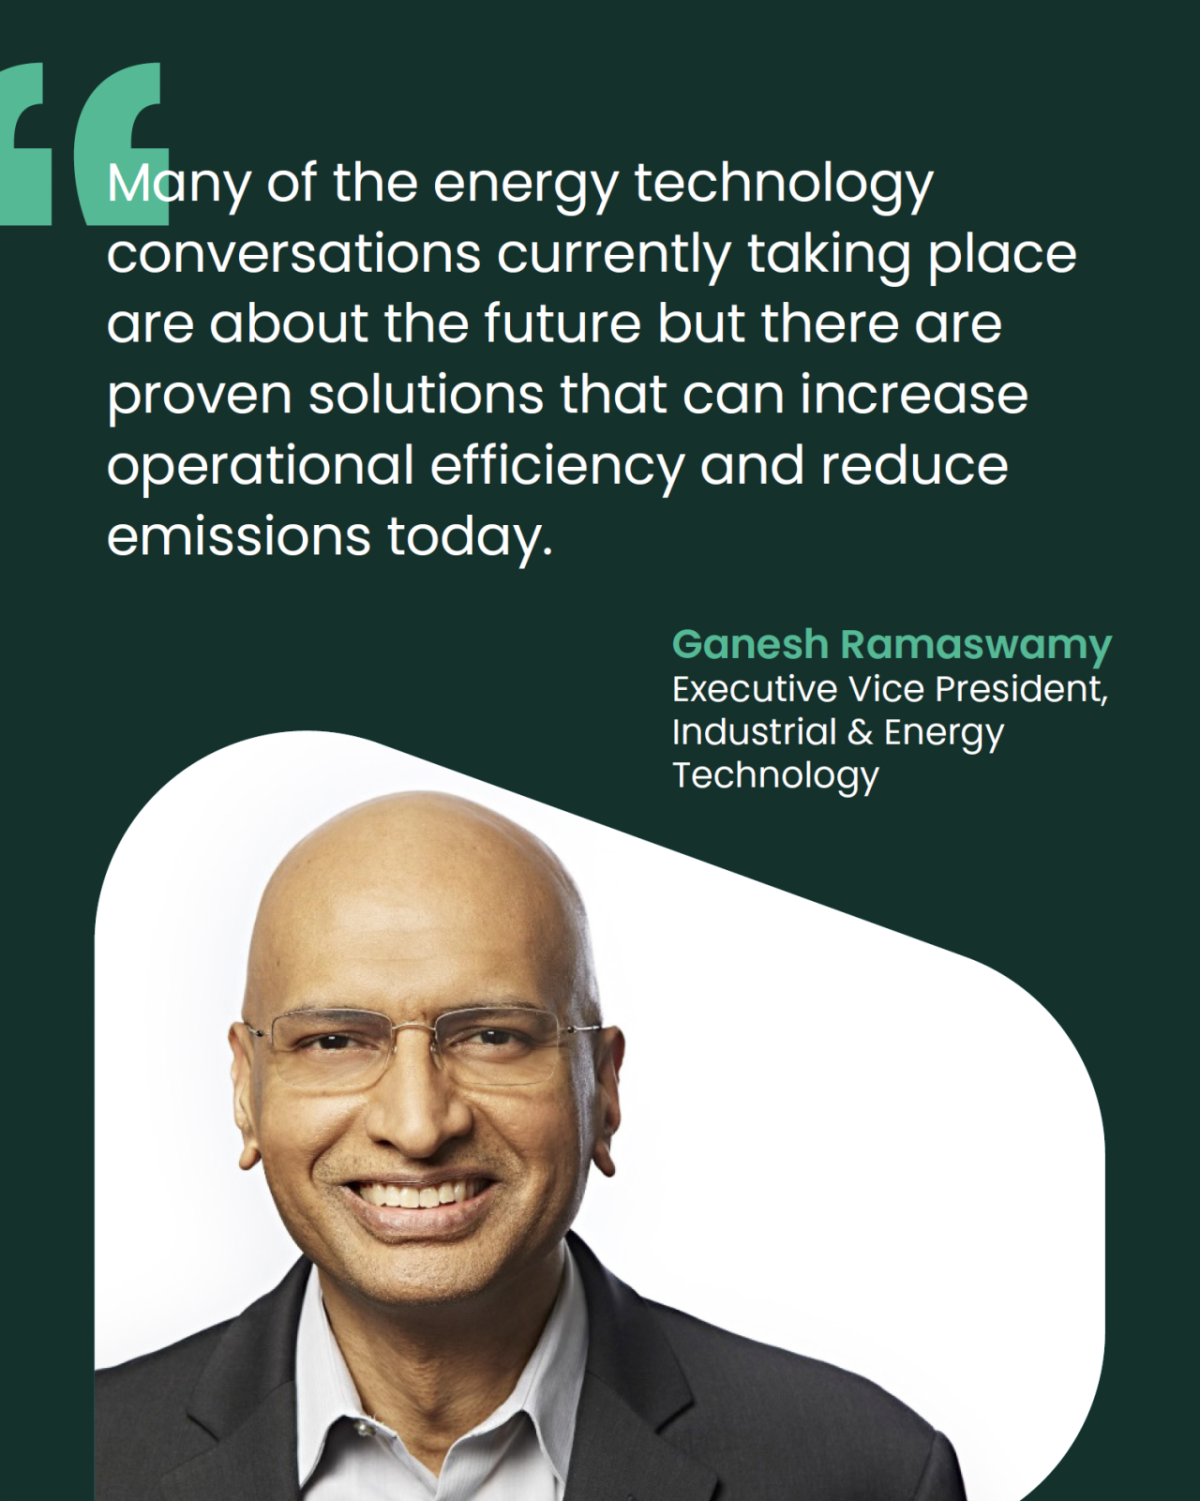 Quote from Ganesh Ramaswamy that reads: "Many of the energy technology conversations currently taking place are about the future but there are proven solutions that can increase operational efficiency and reduce emissions today"